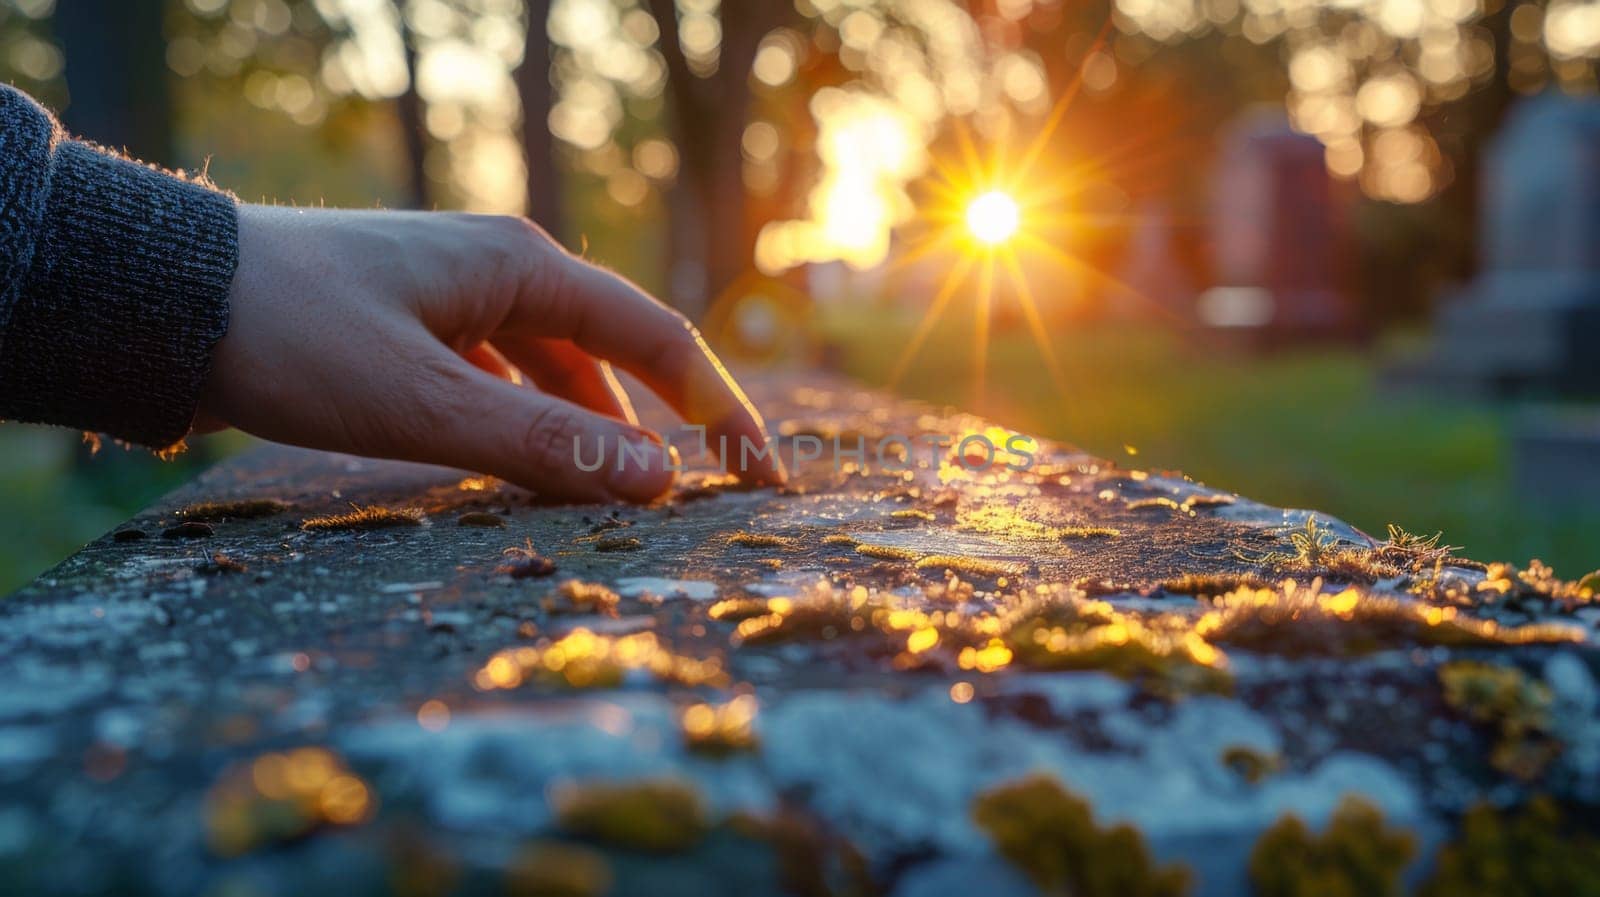 A person touching a stone with moss on it at sunset, AI by starush